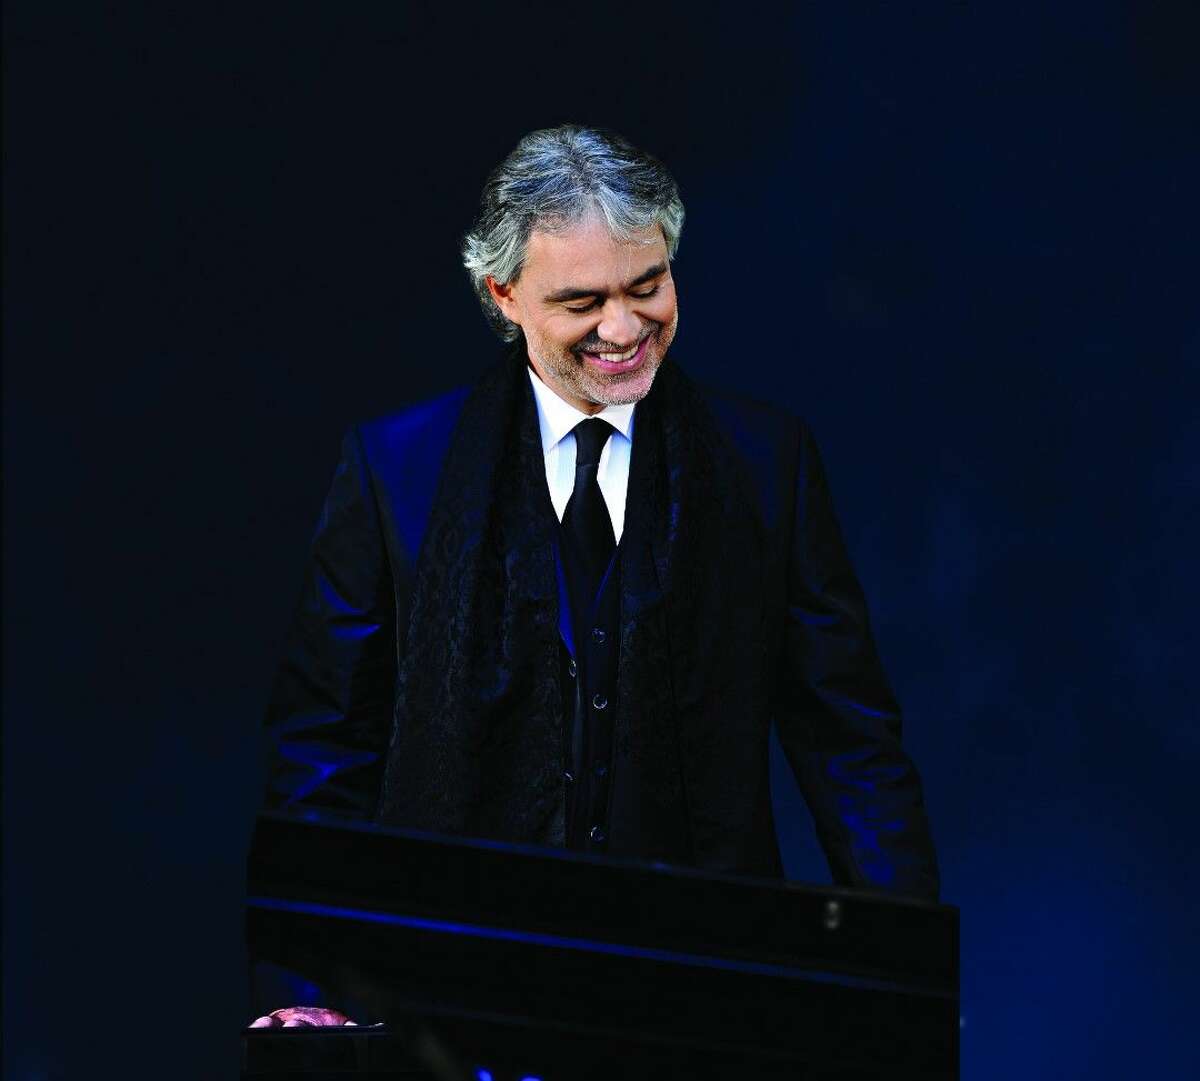 On Dec. 10, world-renowned and beloved Italian tenor Andrea Bocelli will return to Houston by popular demand to perform with the Houston Symphony and Houston Symphony Chorus in a special, one-night-only concert at the Toyota Center.